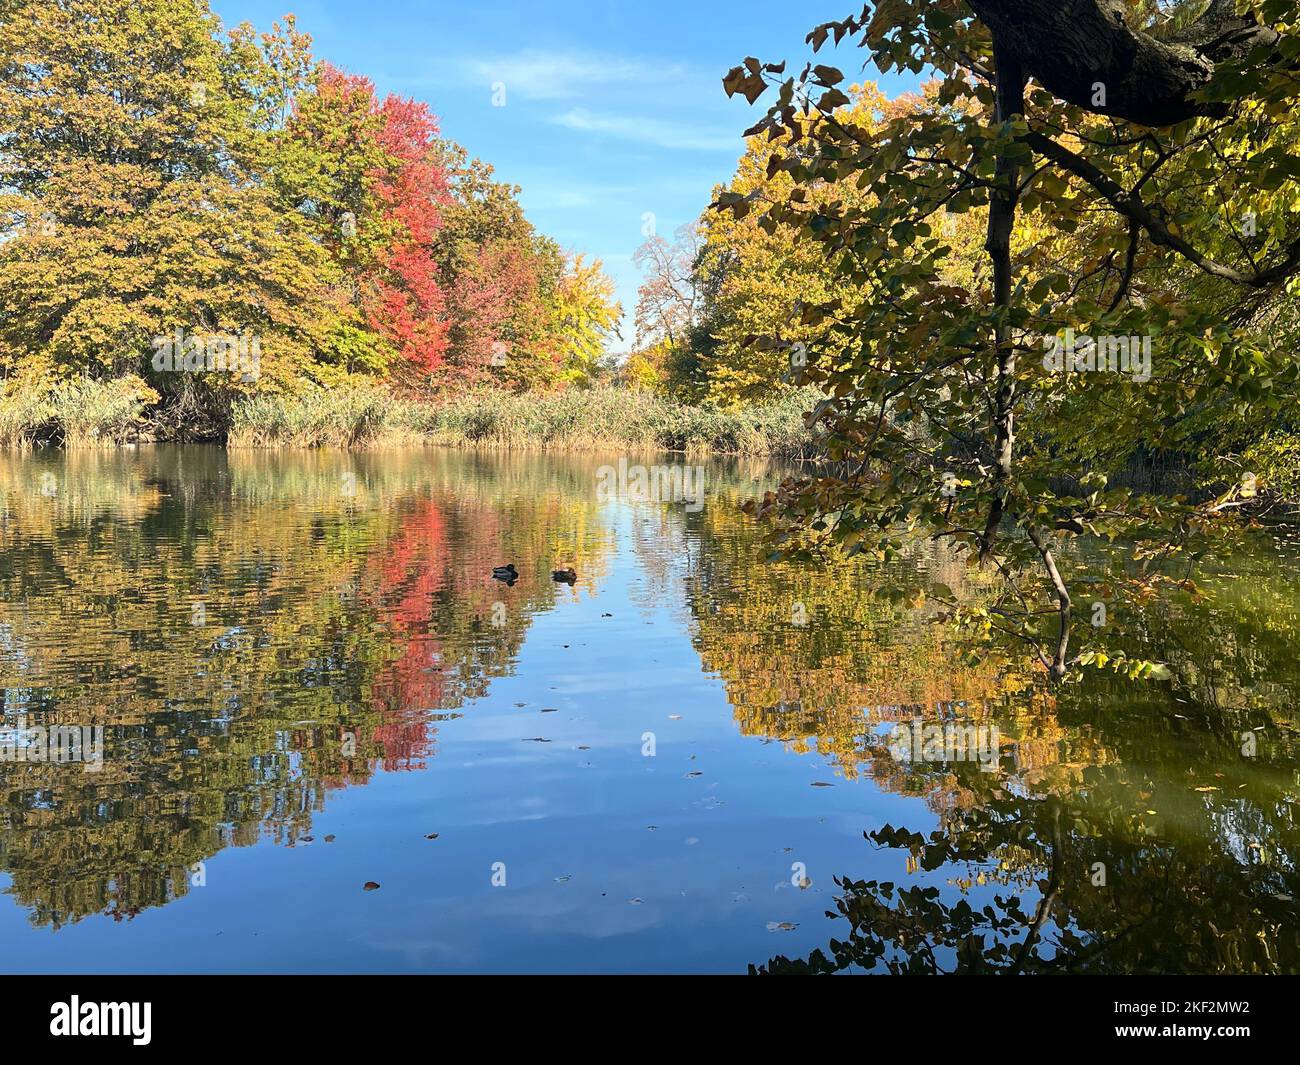 Colorful autumn scene along the lake in Prospect Park, Brooklyn, New York. Stock Photo